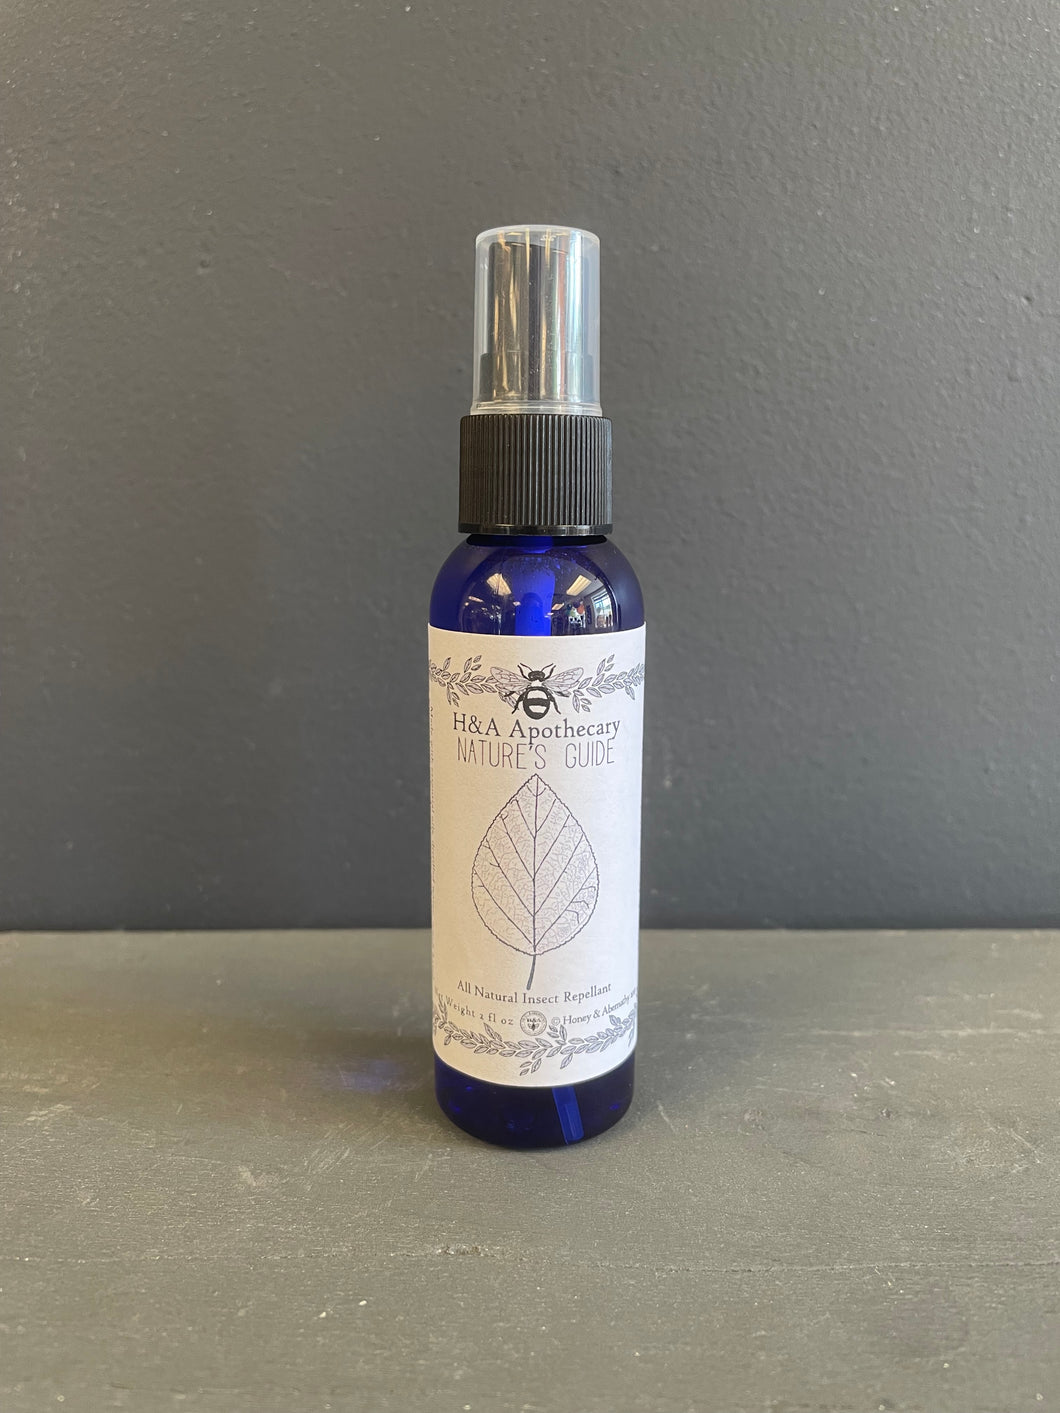 H&A Apothecary Nature’s Guide Insect Repellant